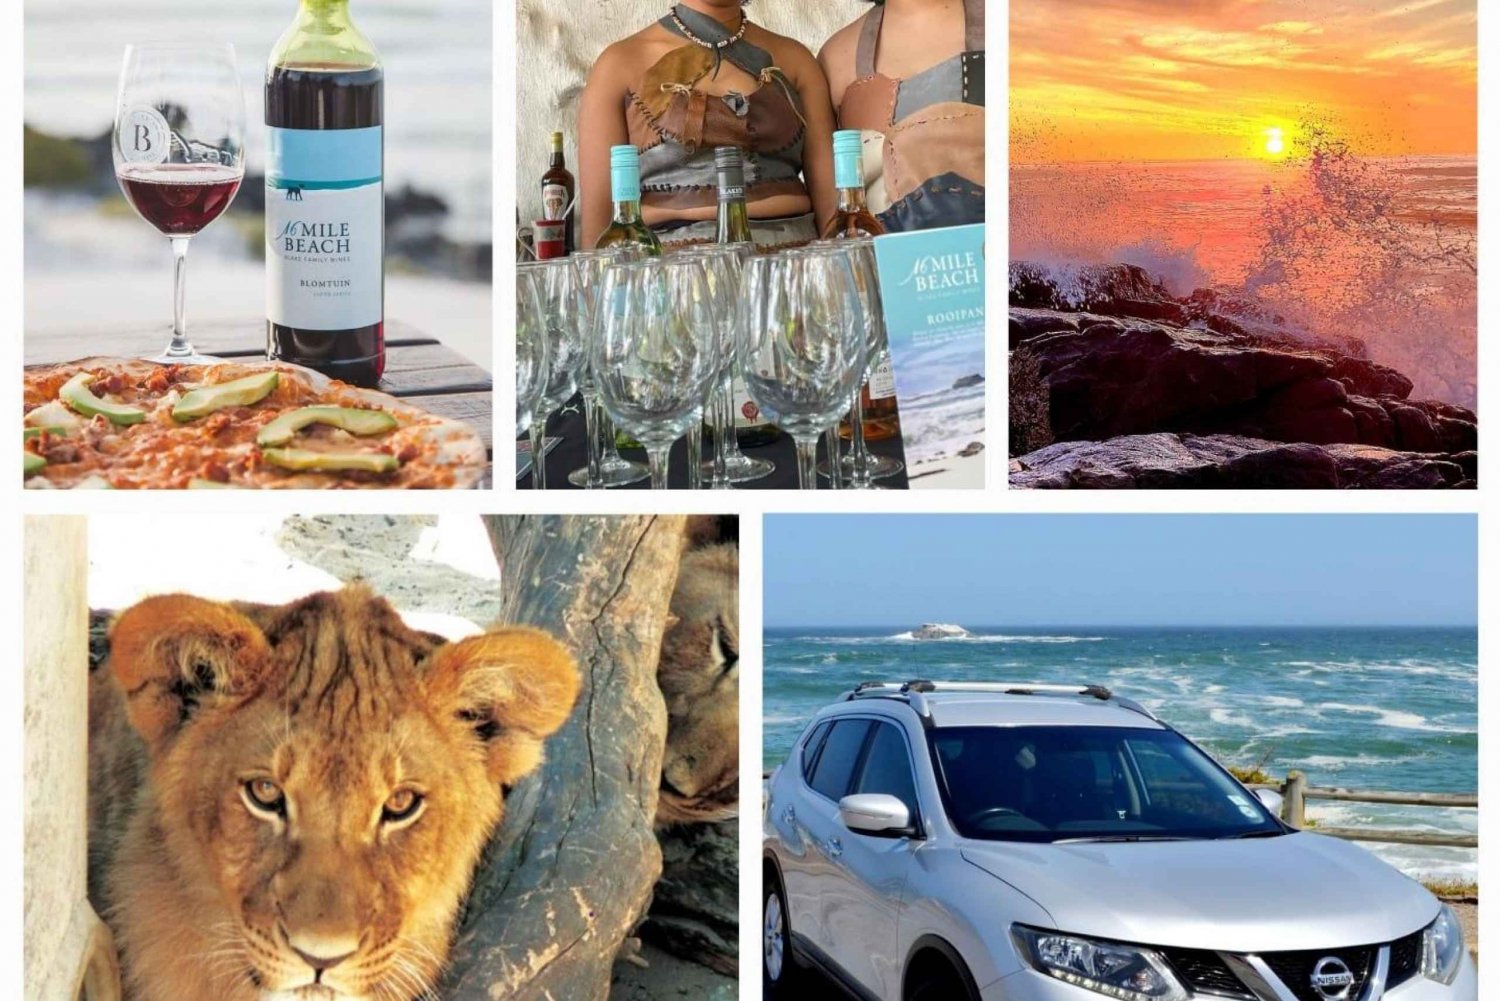 Westcoast day outing with game drive, and wine tasting